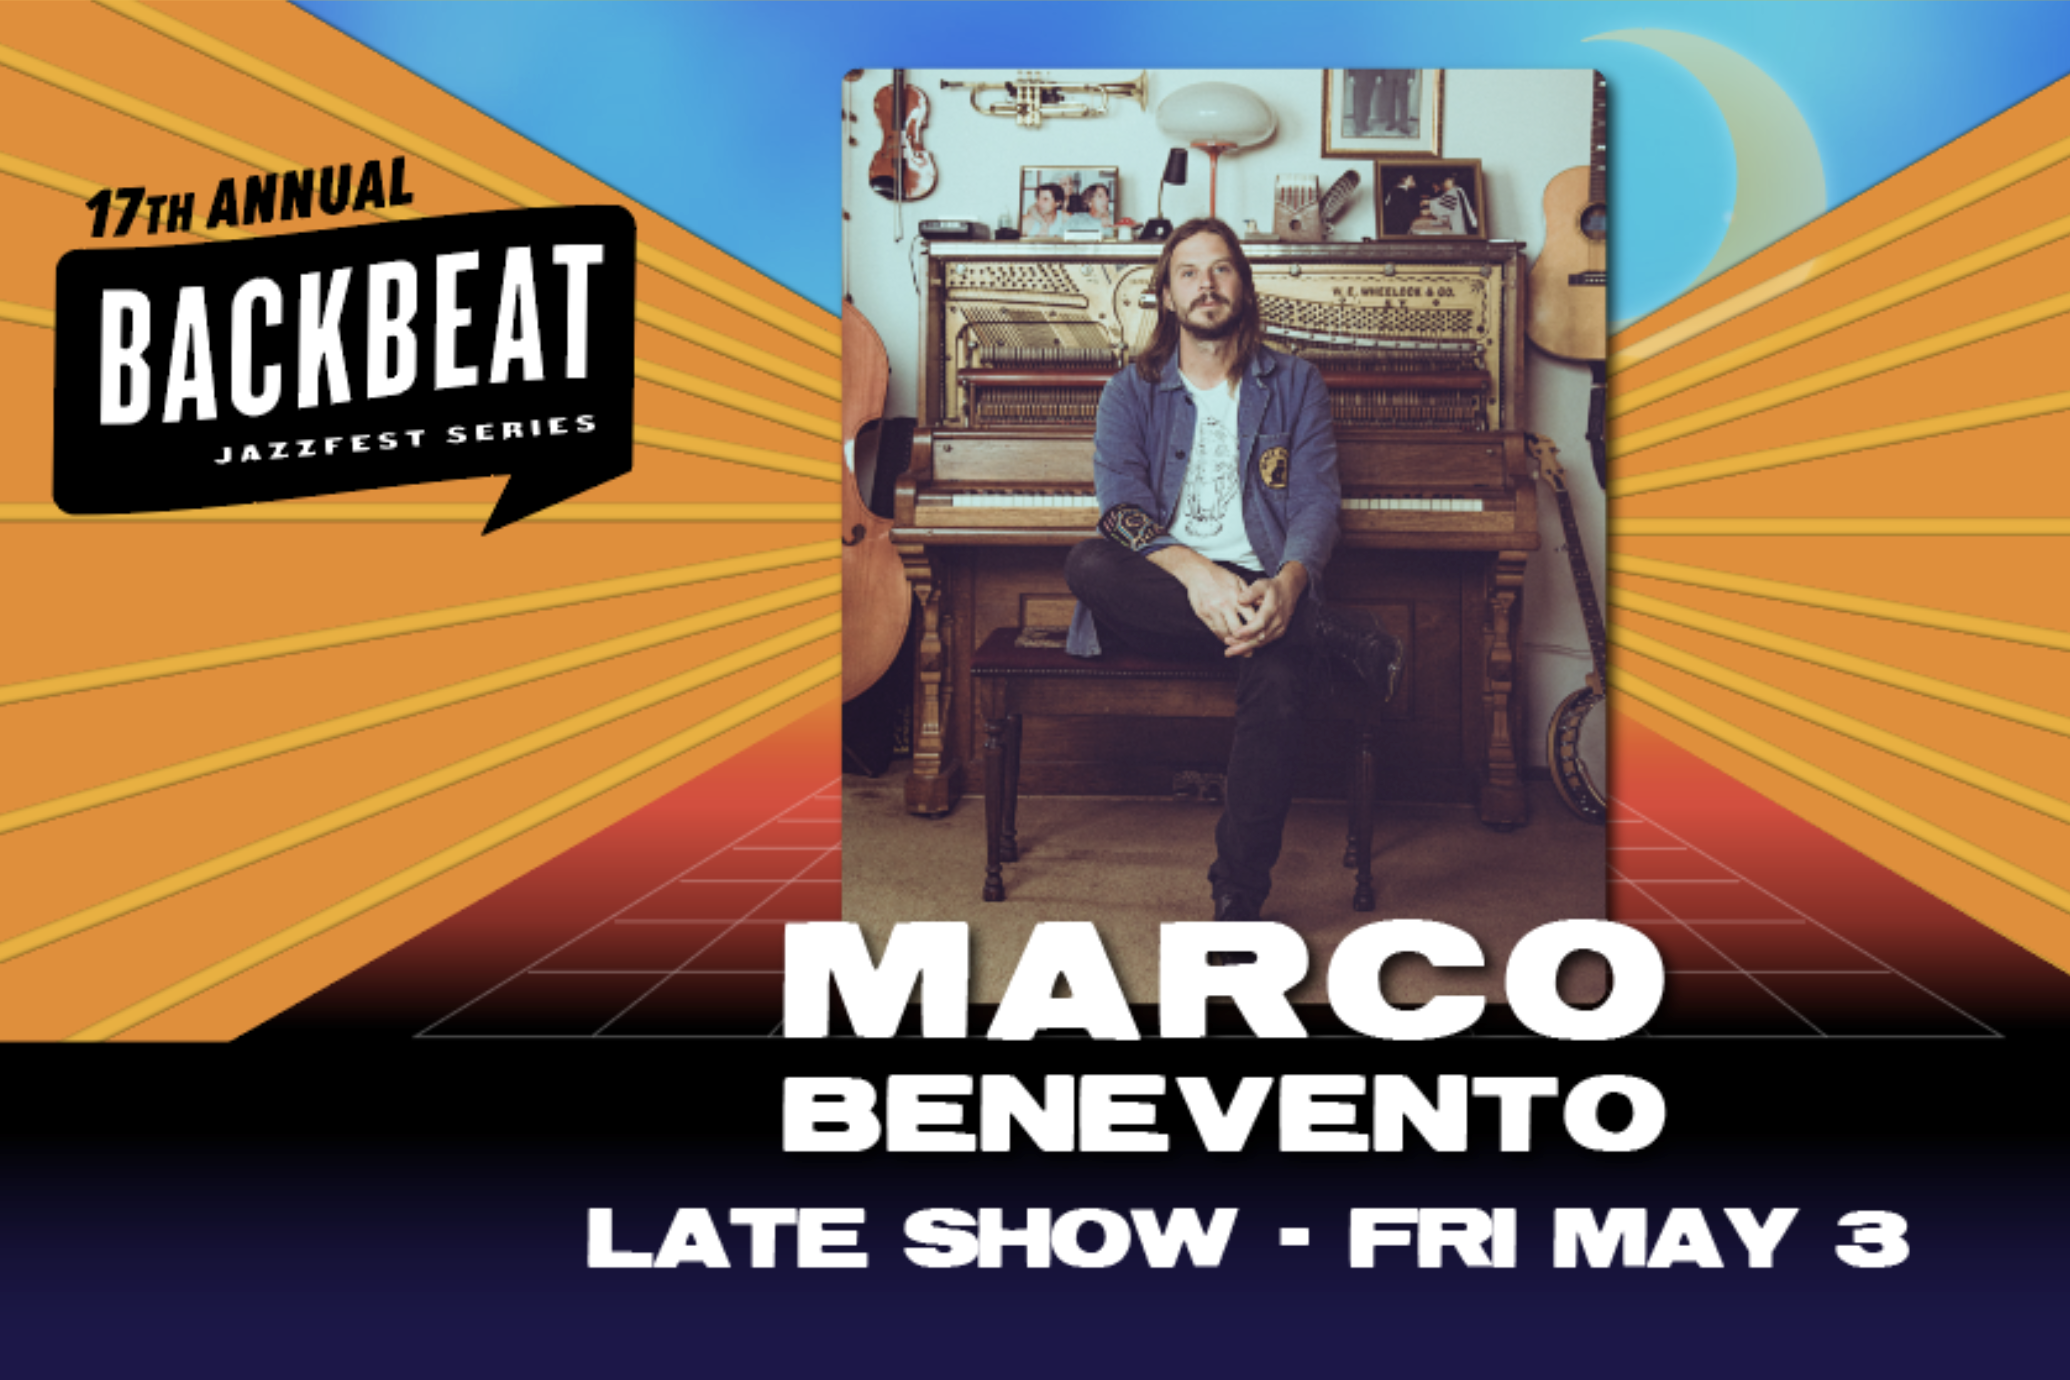 Marco Benevento • (LATE SHOW) FRI MAY 3 • 2AM